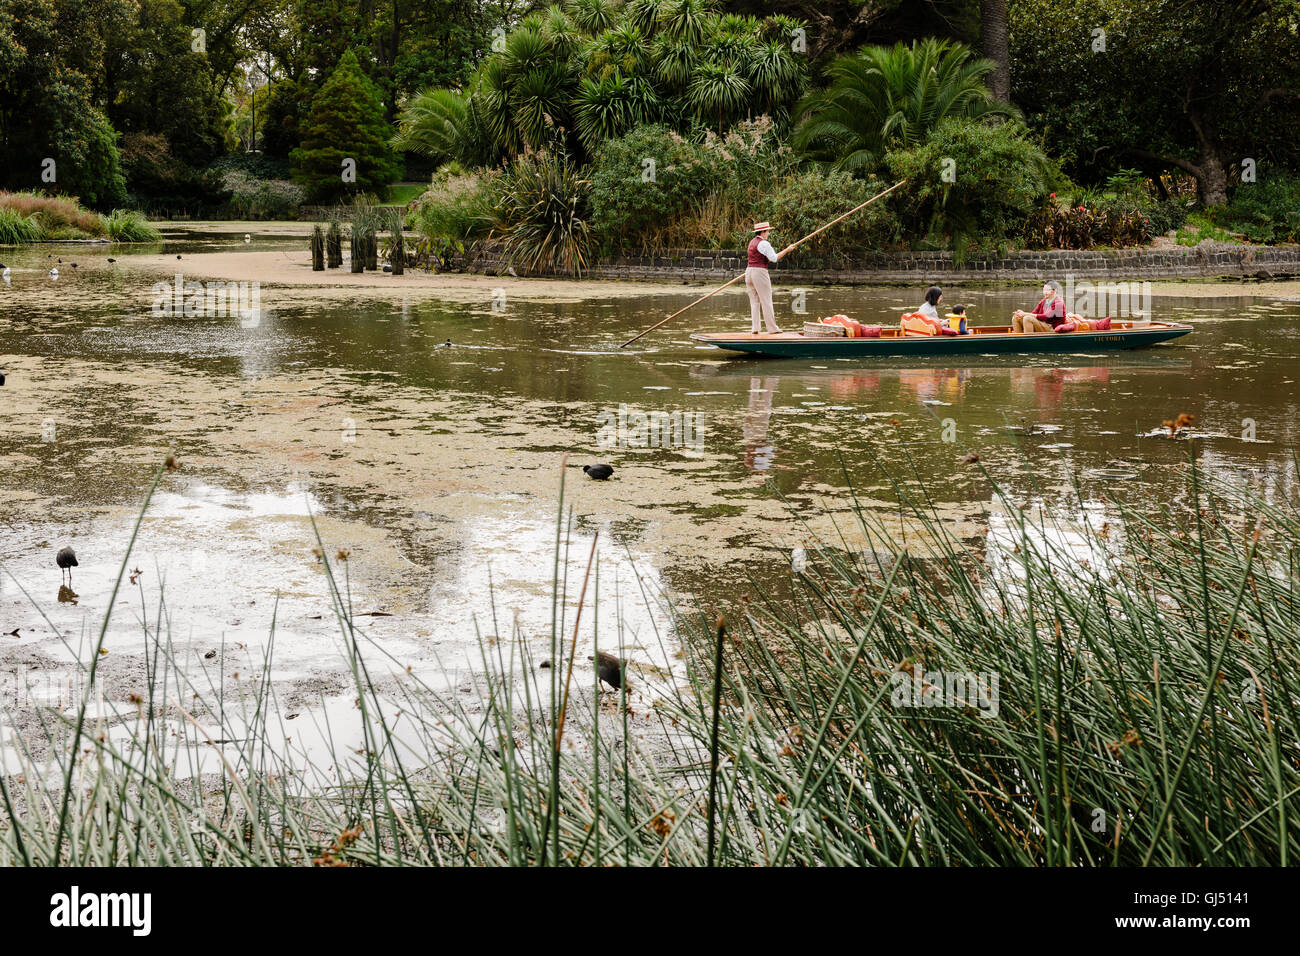 Family on a punting tour on Ornamental Lake in the Royal Botanic Gardens Melbourne. Stock Photo